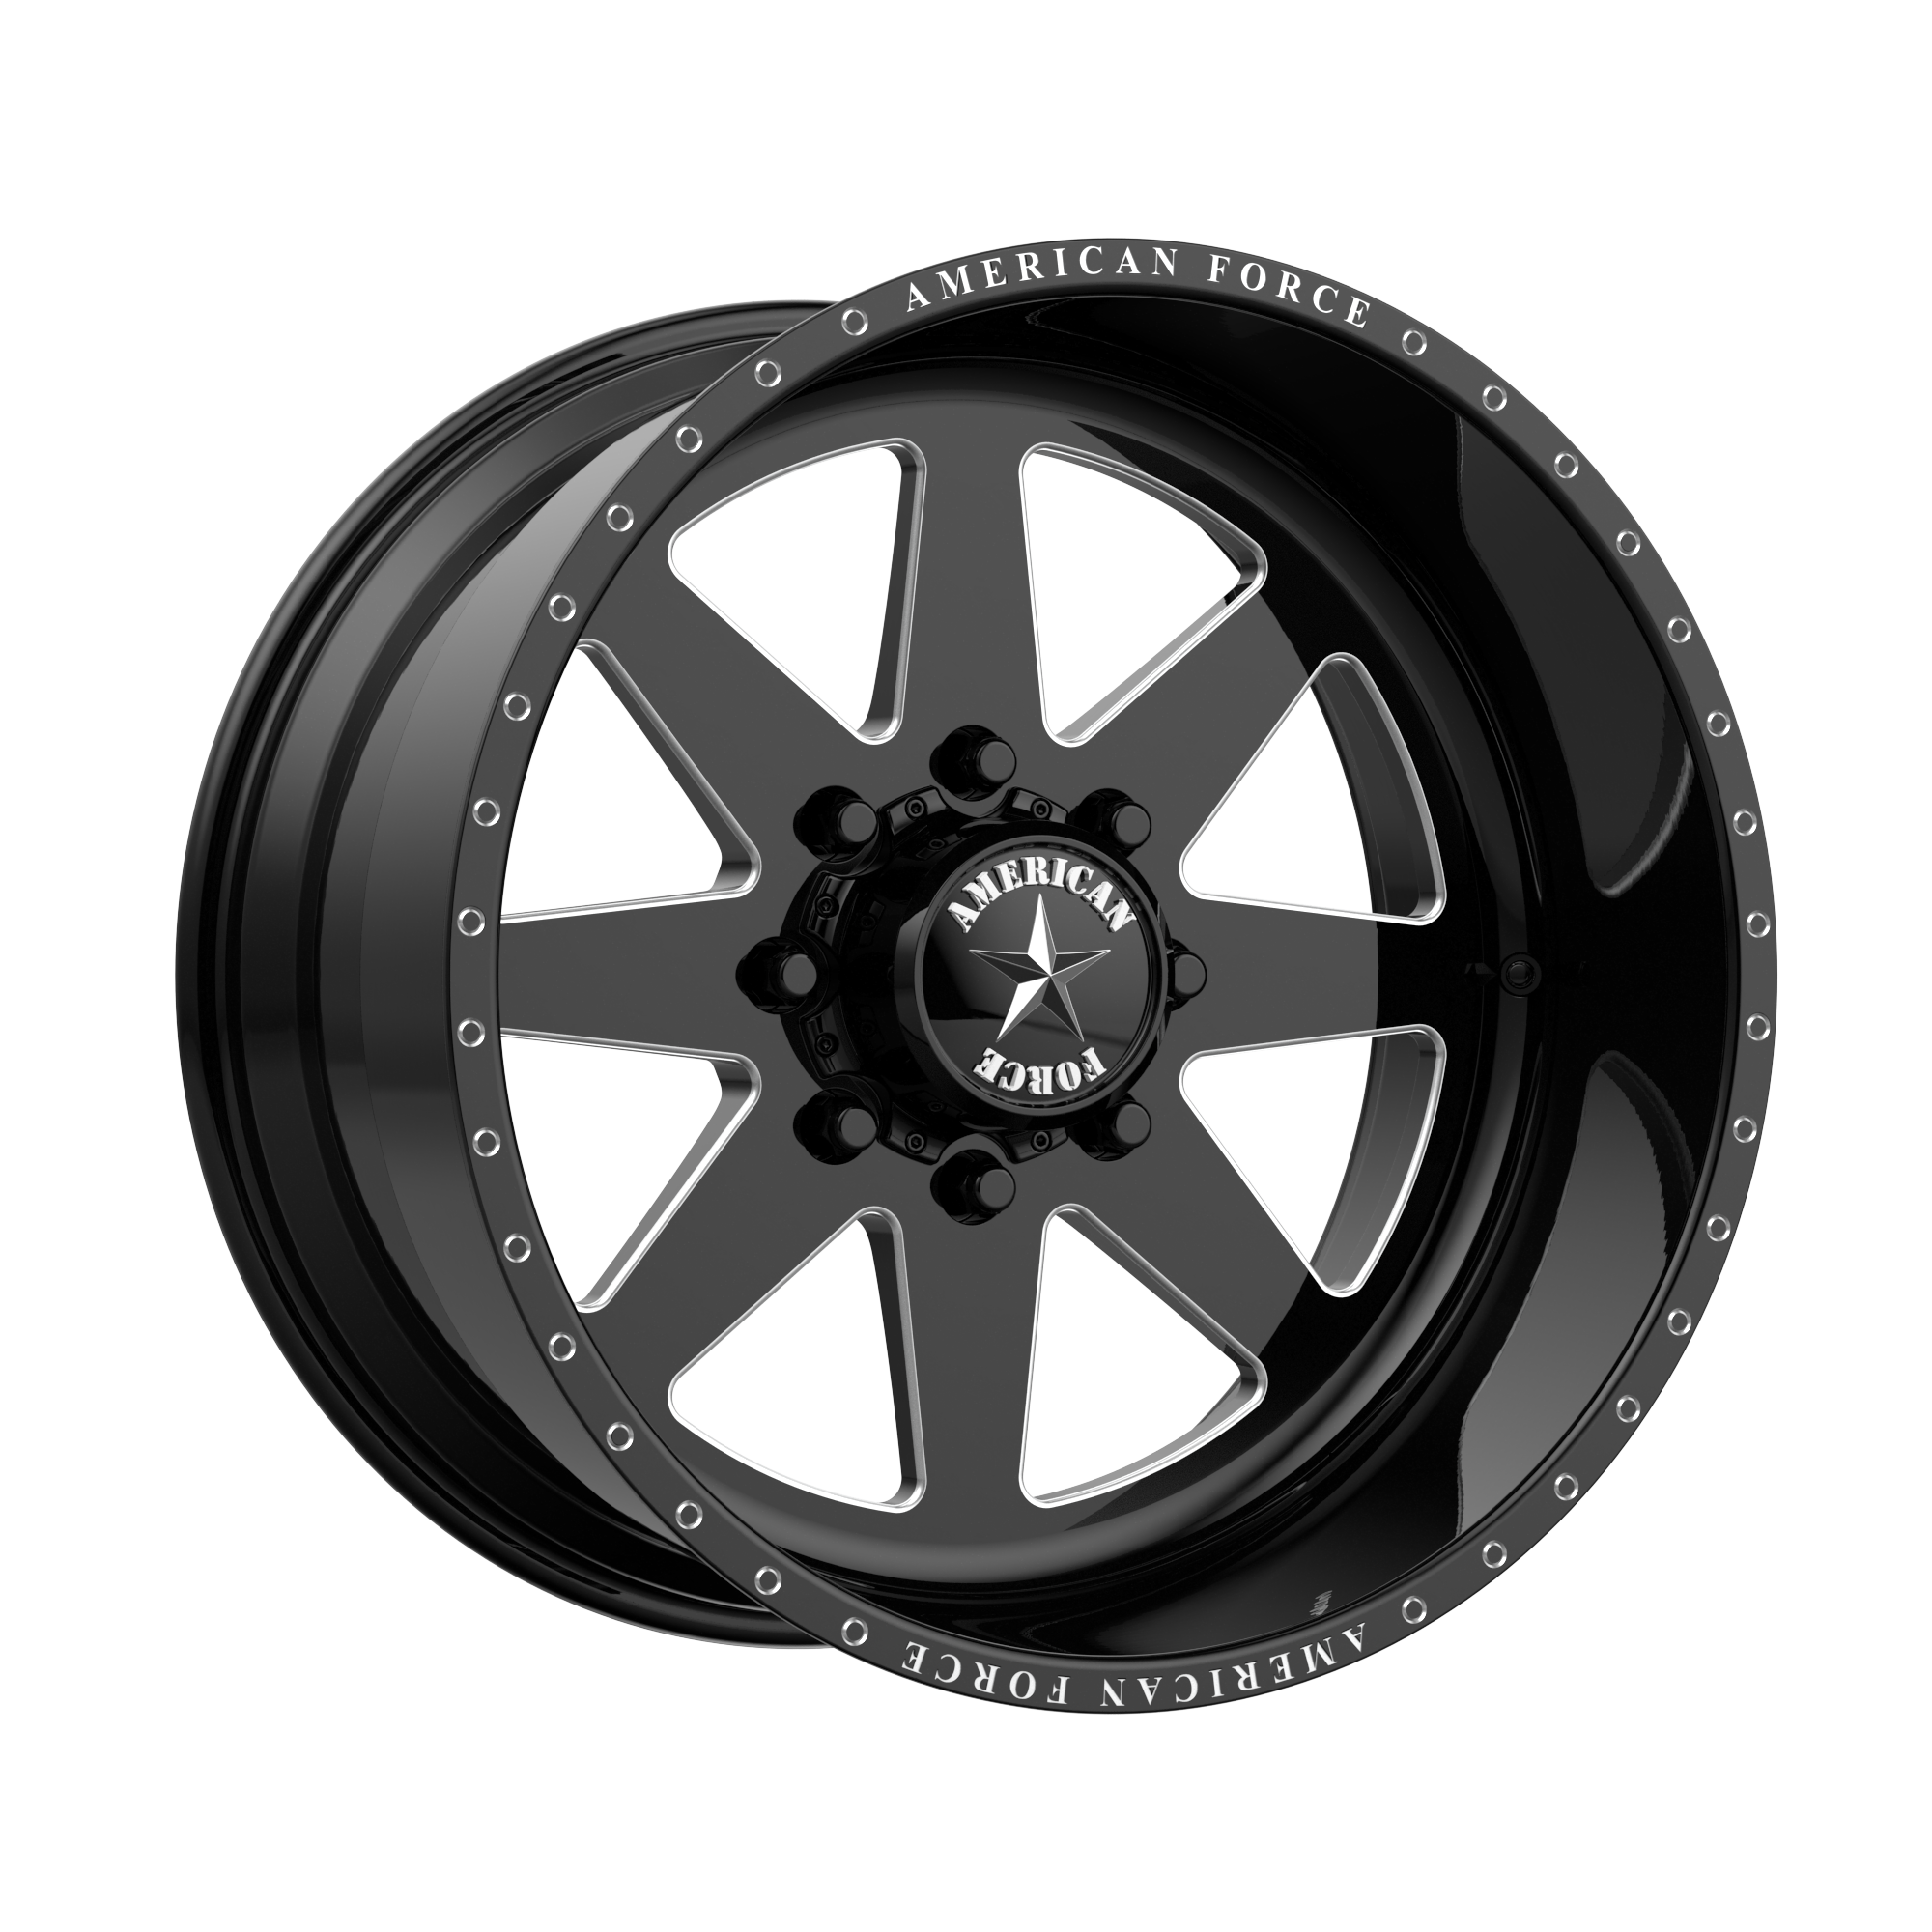 INDEPENDENCE SS 26x16 6x135.00 GLOSS BLACK MACHINED (-101 mm) - Tires and Engine Performance